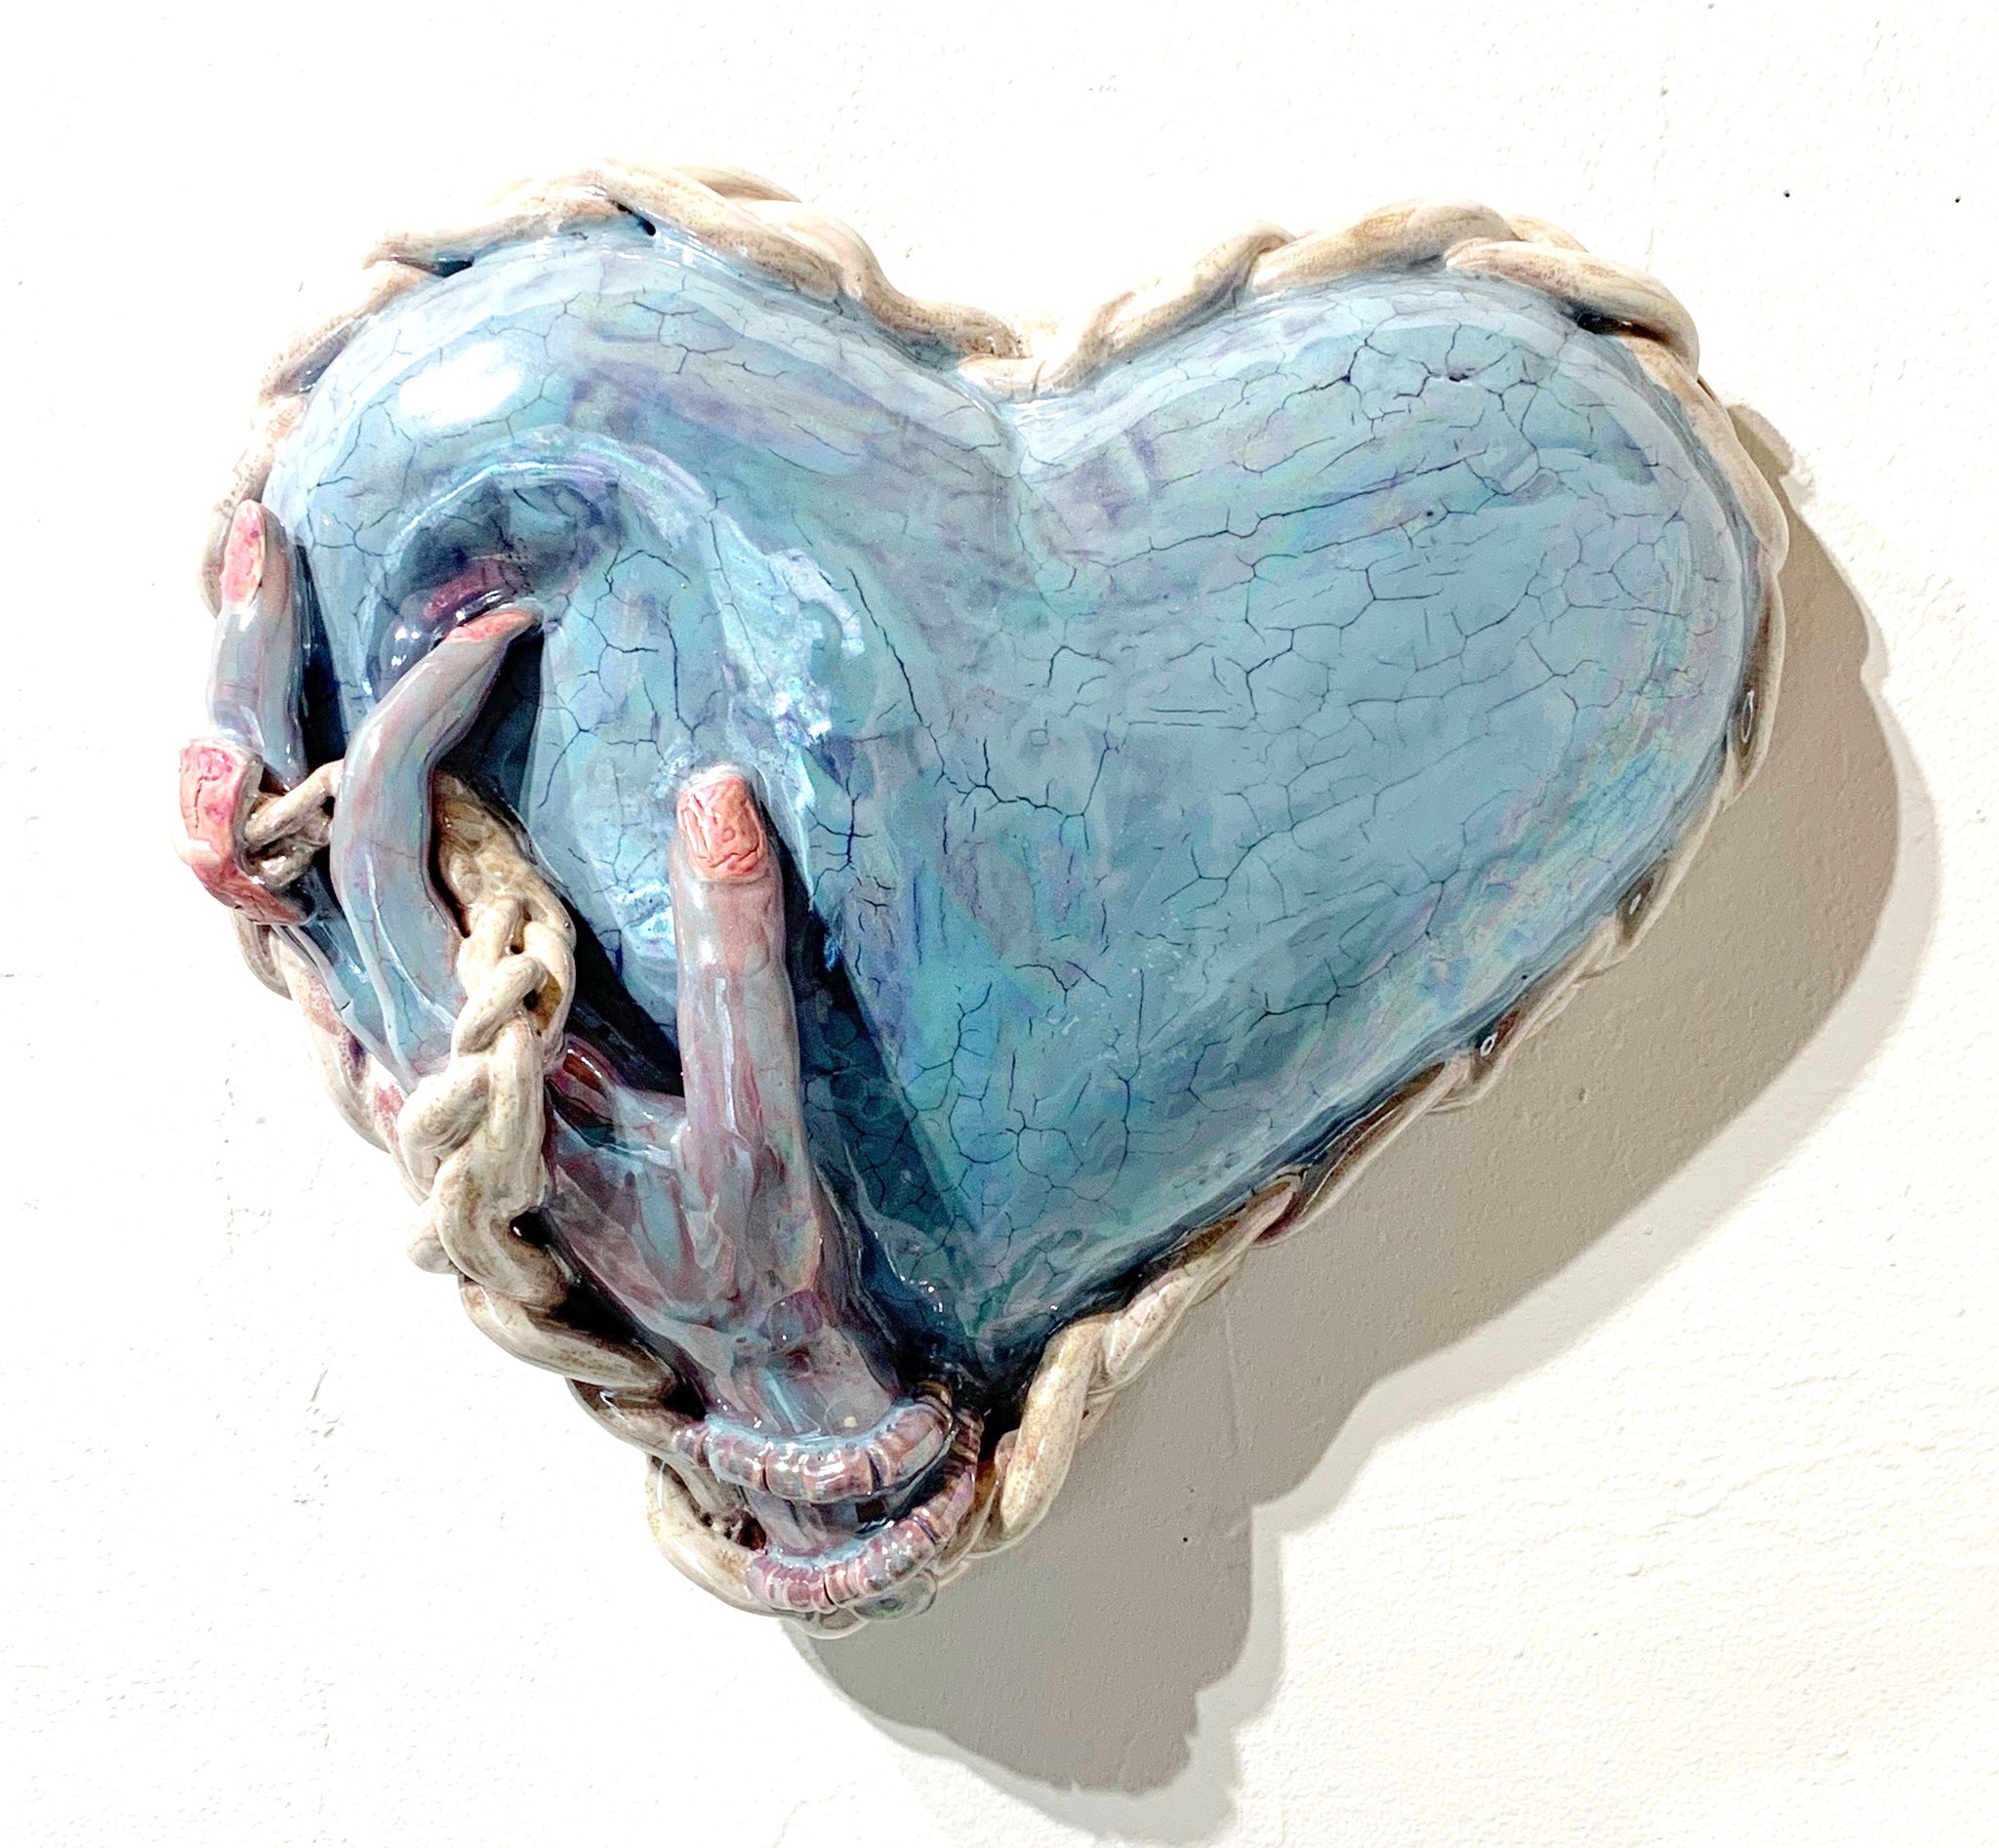 Jen Dwyer, "Heart Balloon with a Soft Pressure Point"